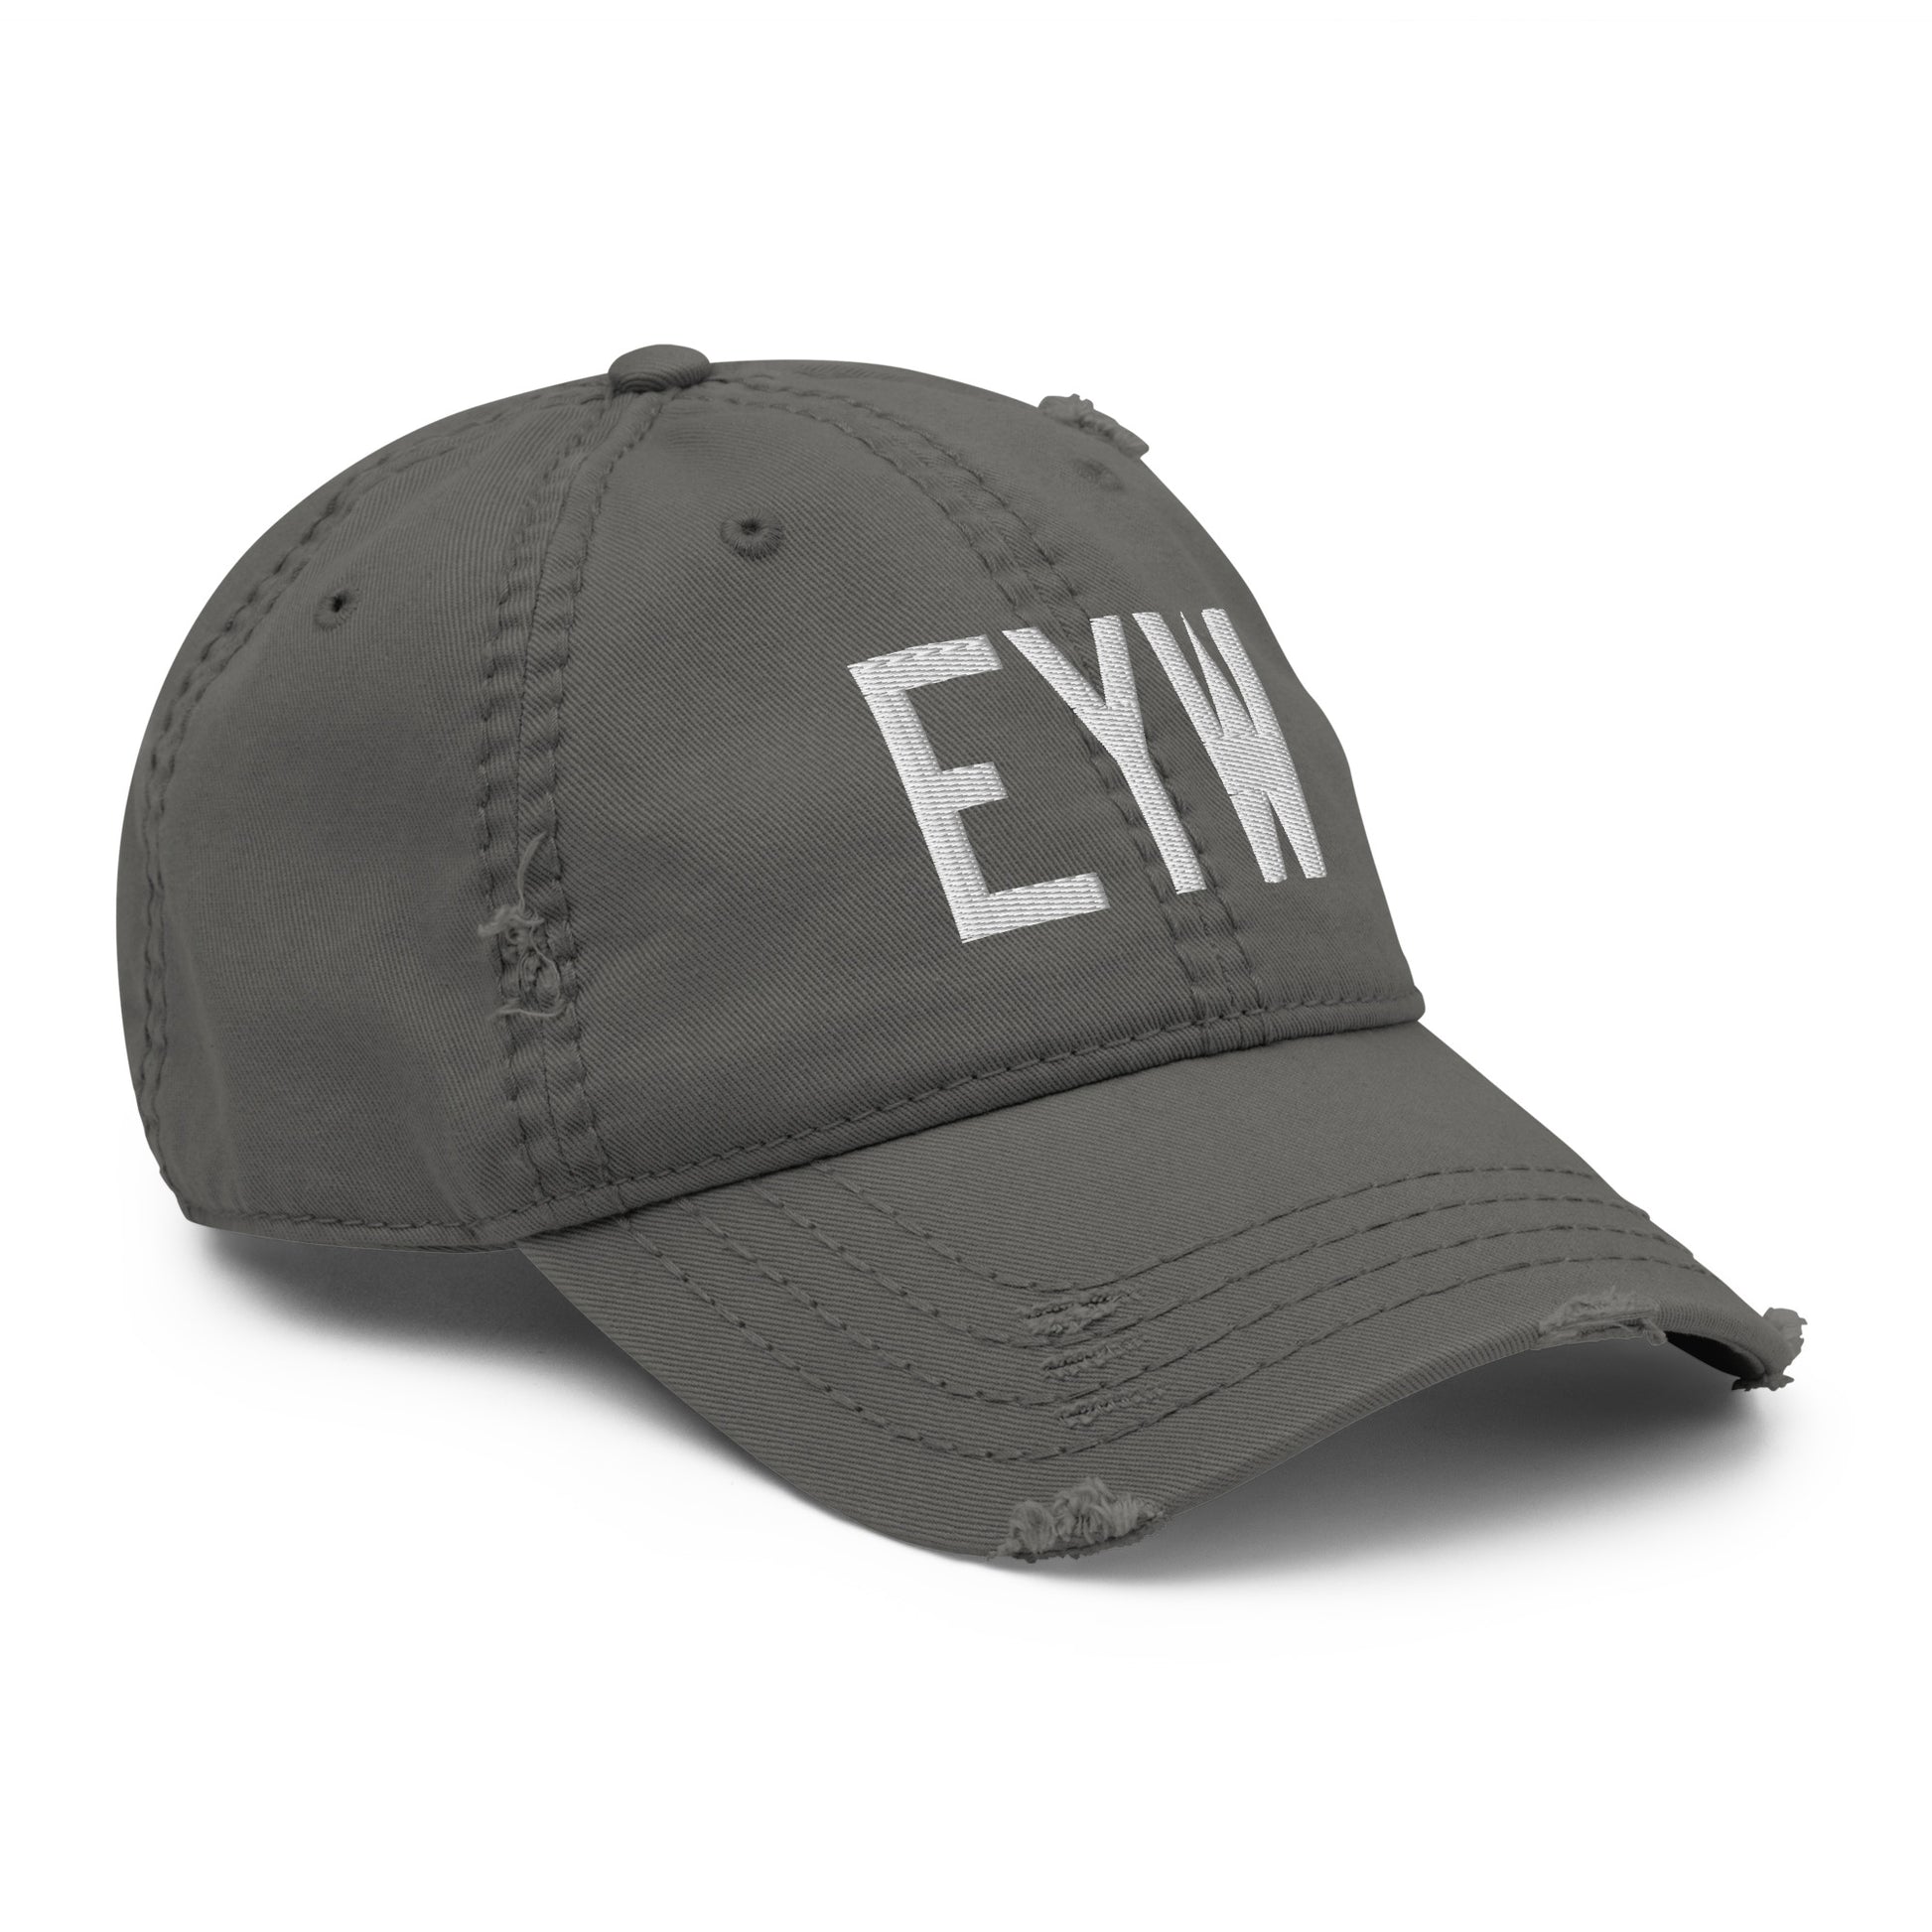 Airport Code Distressed Hat - White • EYW Key West • YHM Designs - Image 17